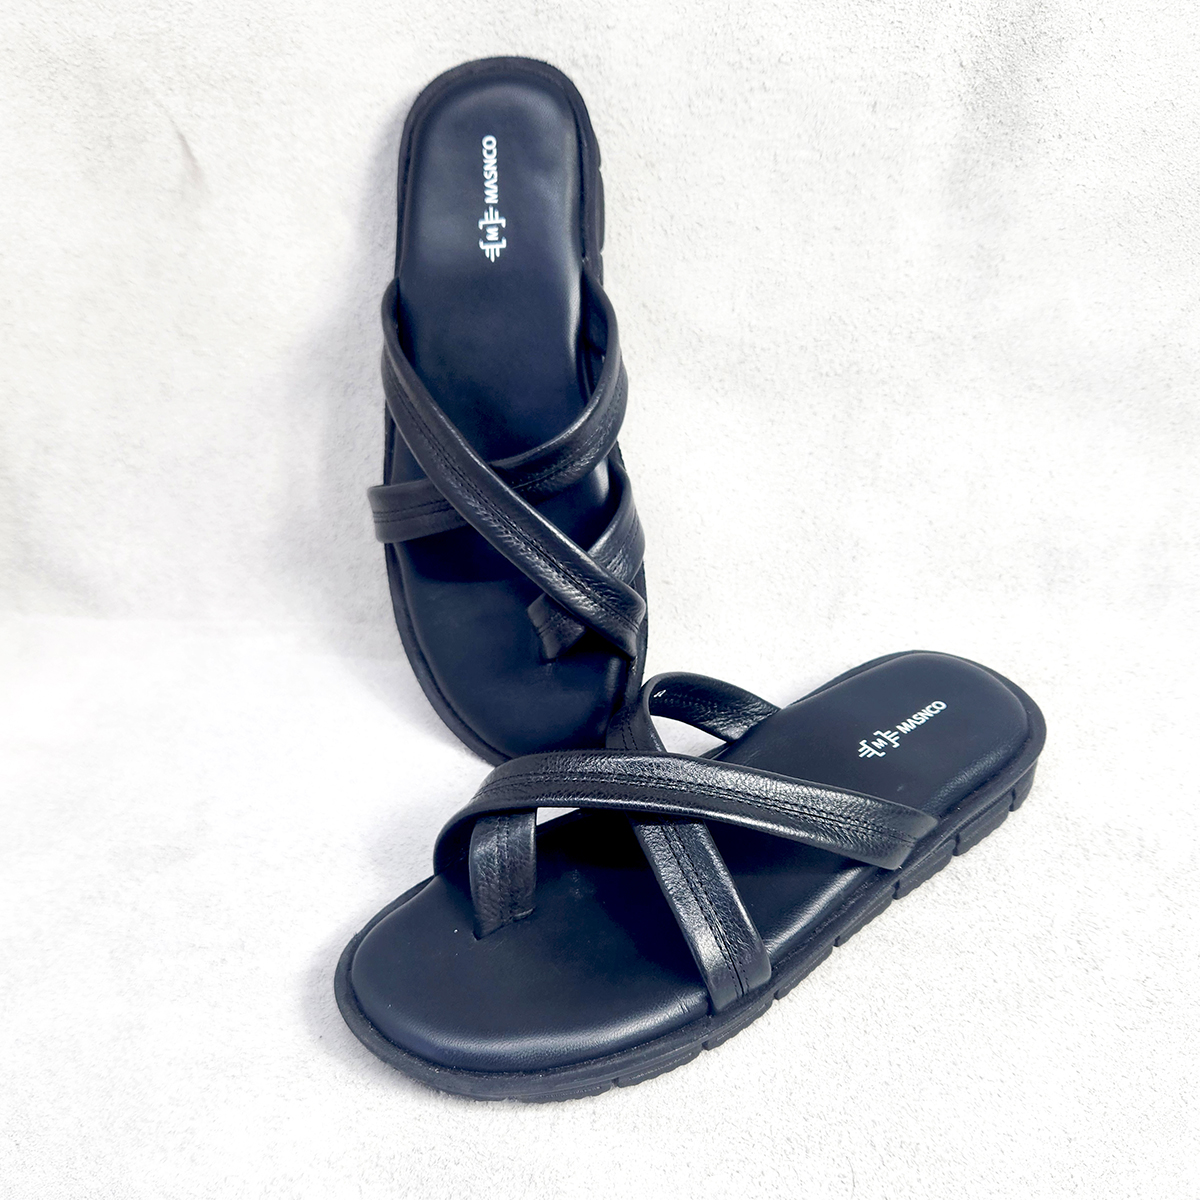 Leather Straps Sandals In Black